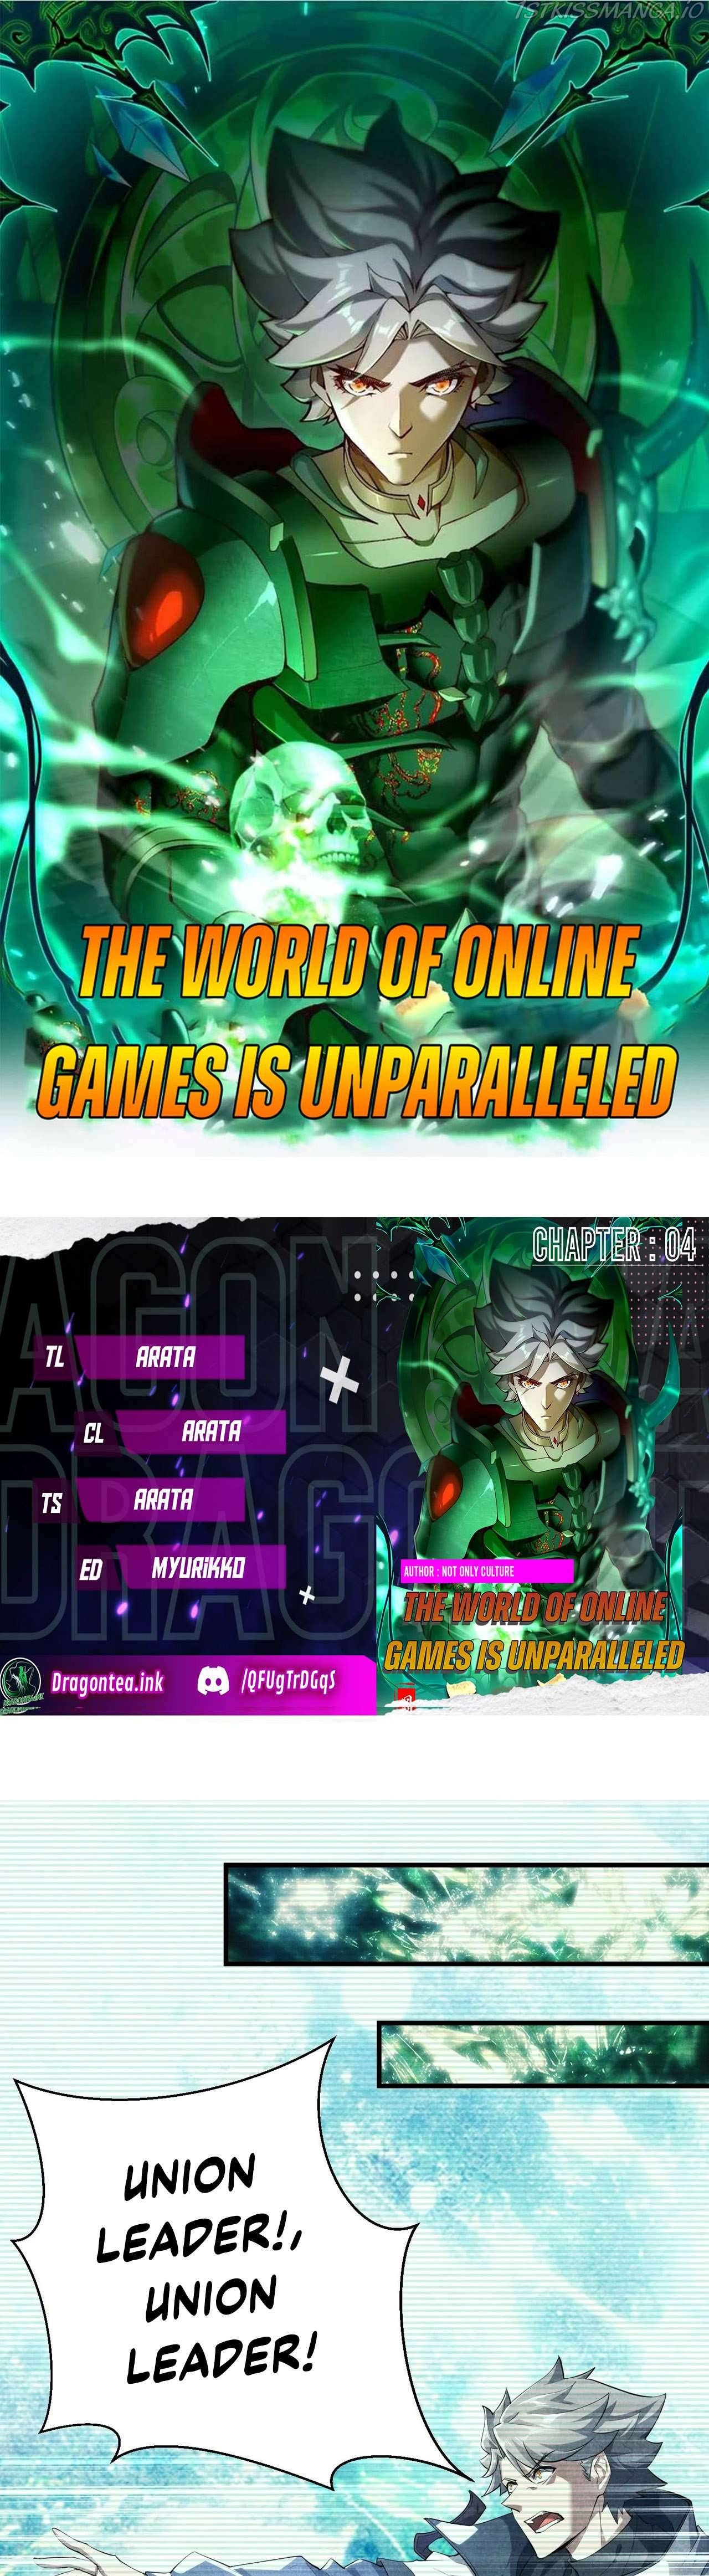 The World Of Online Games Is Unparalleled - Page 2